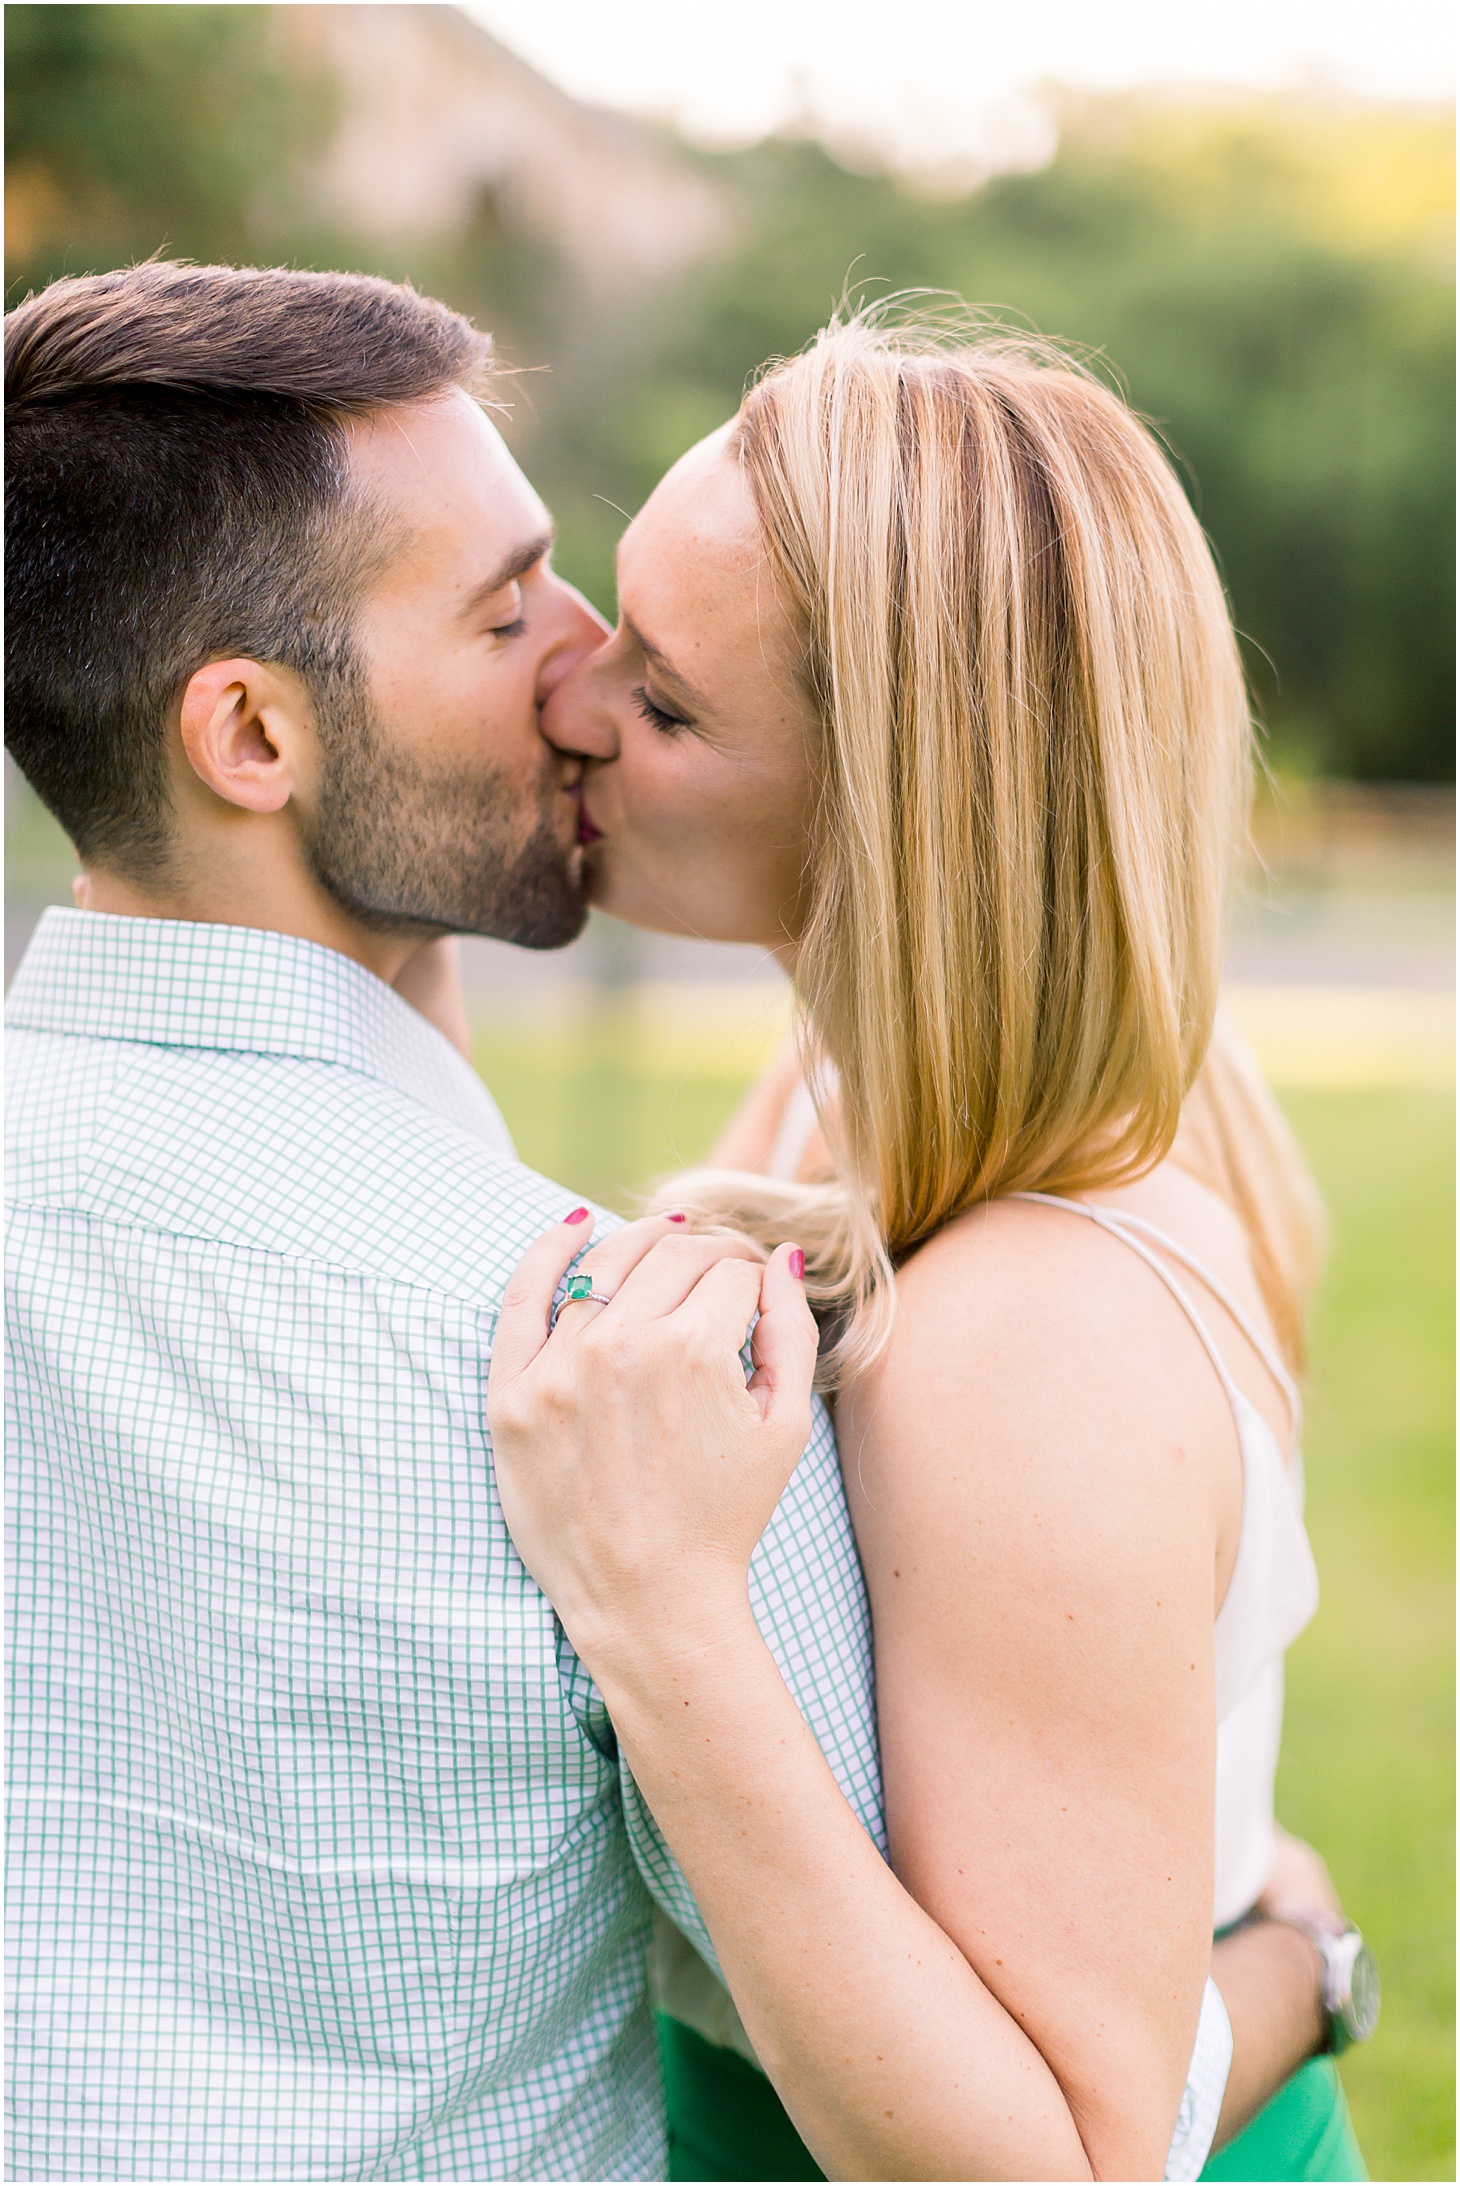 Sunrise Engagement Session in DC, Lincoln Memorial and Woodley Park Engagement Session, Sarah Bradshaw Photography, DC Wedding Photographer